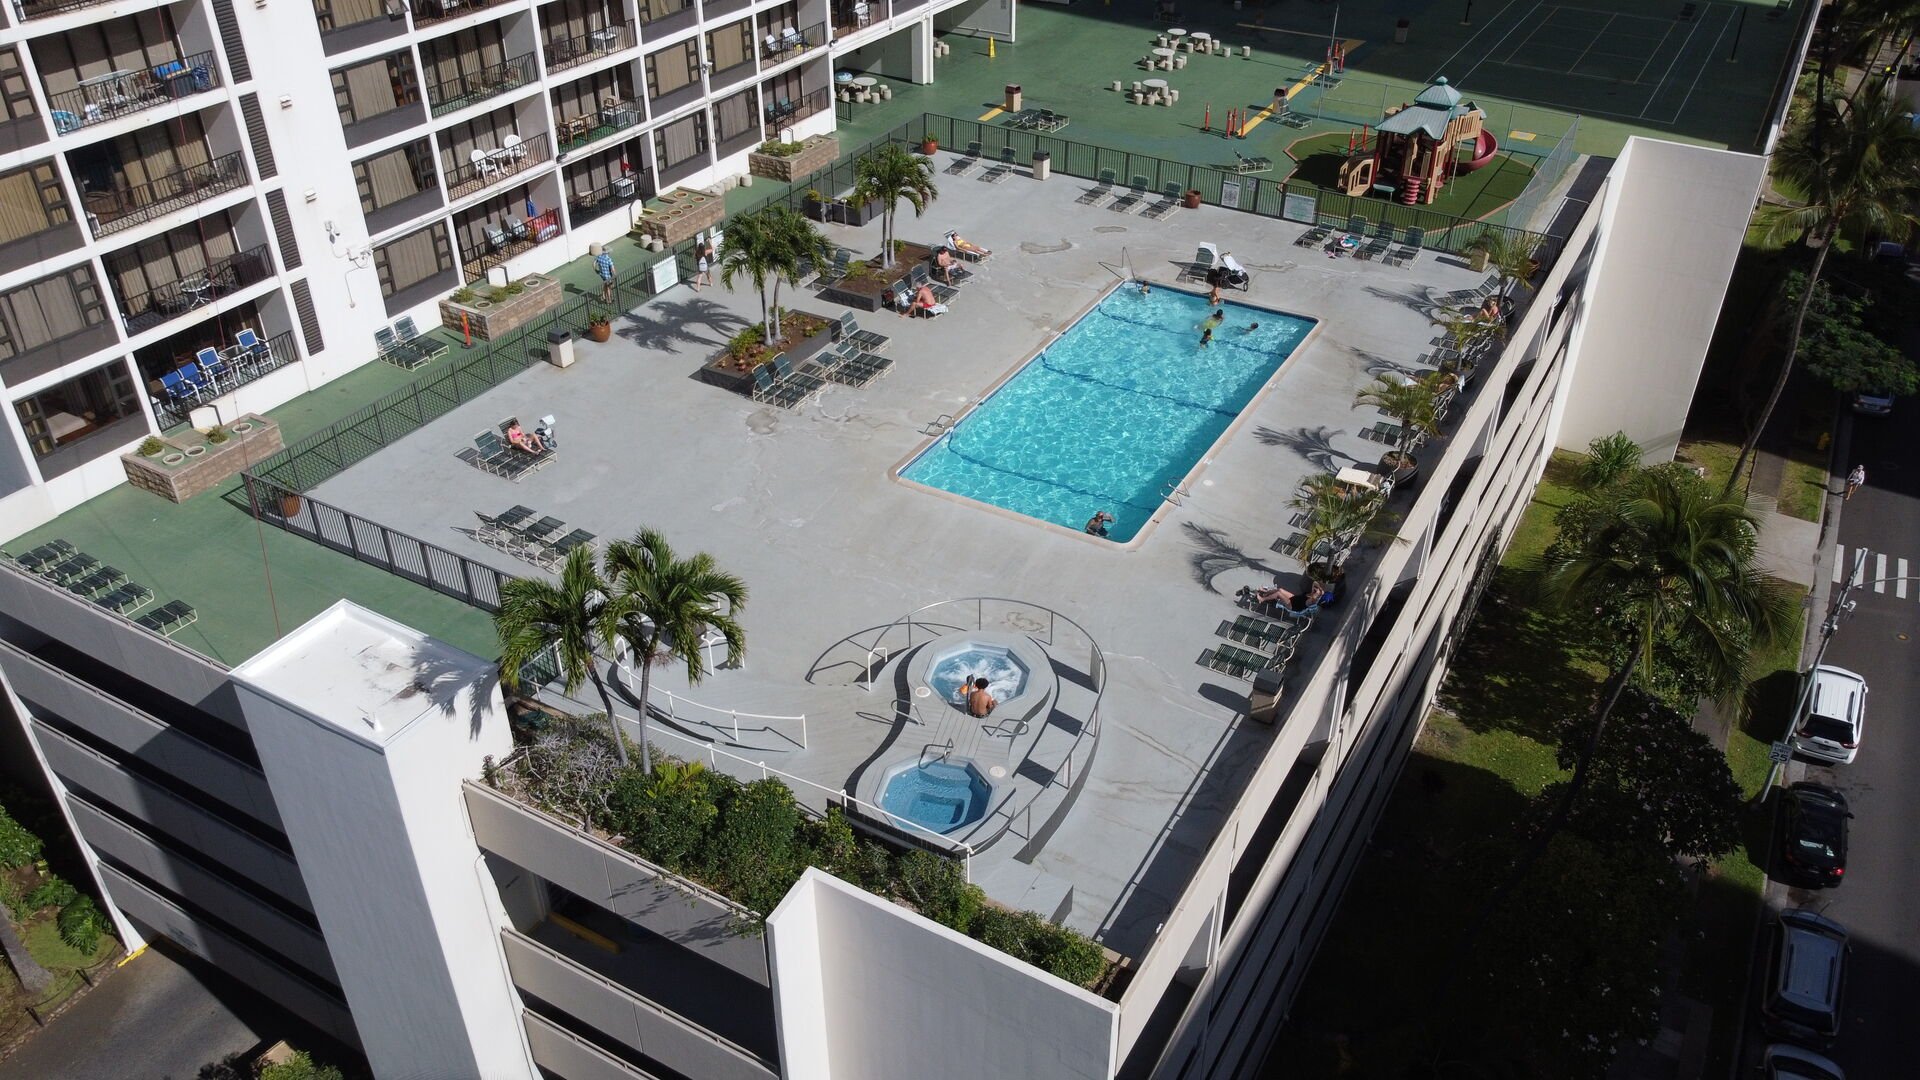 Swimming pool on the 6th floor recreation deck